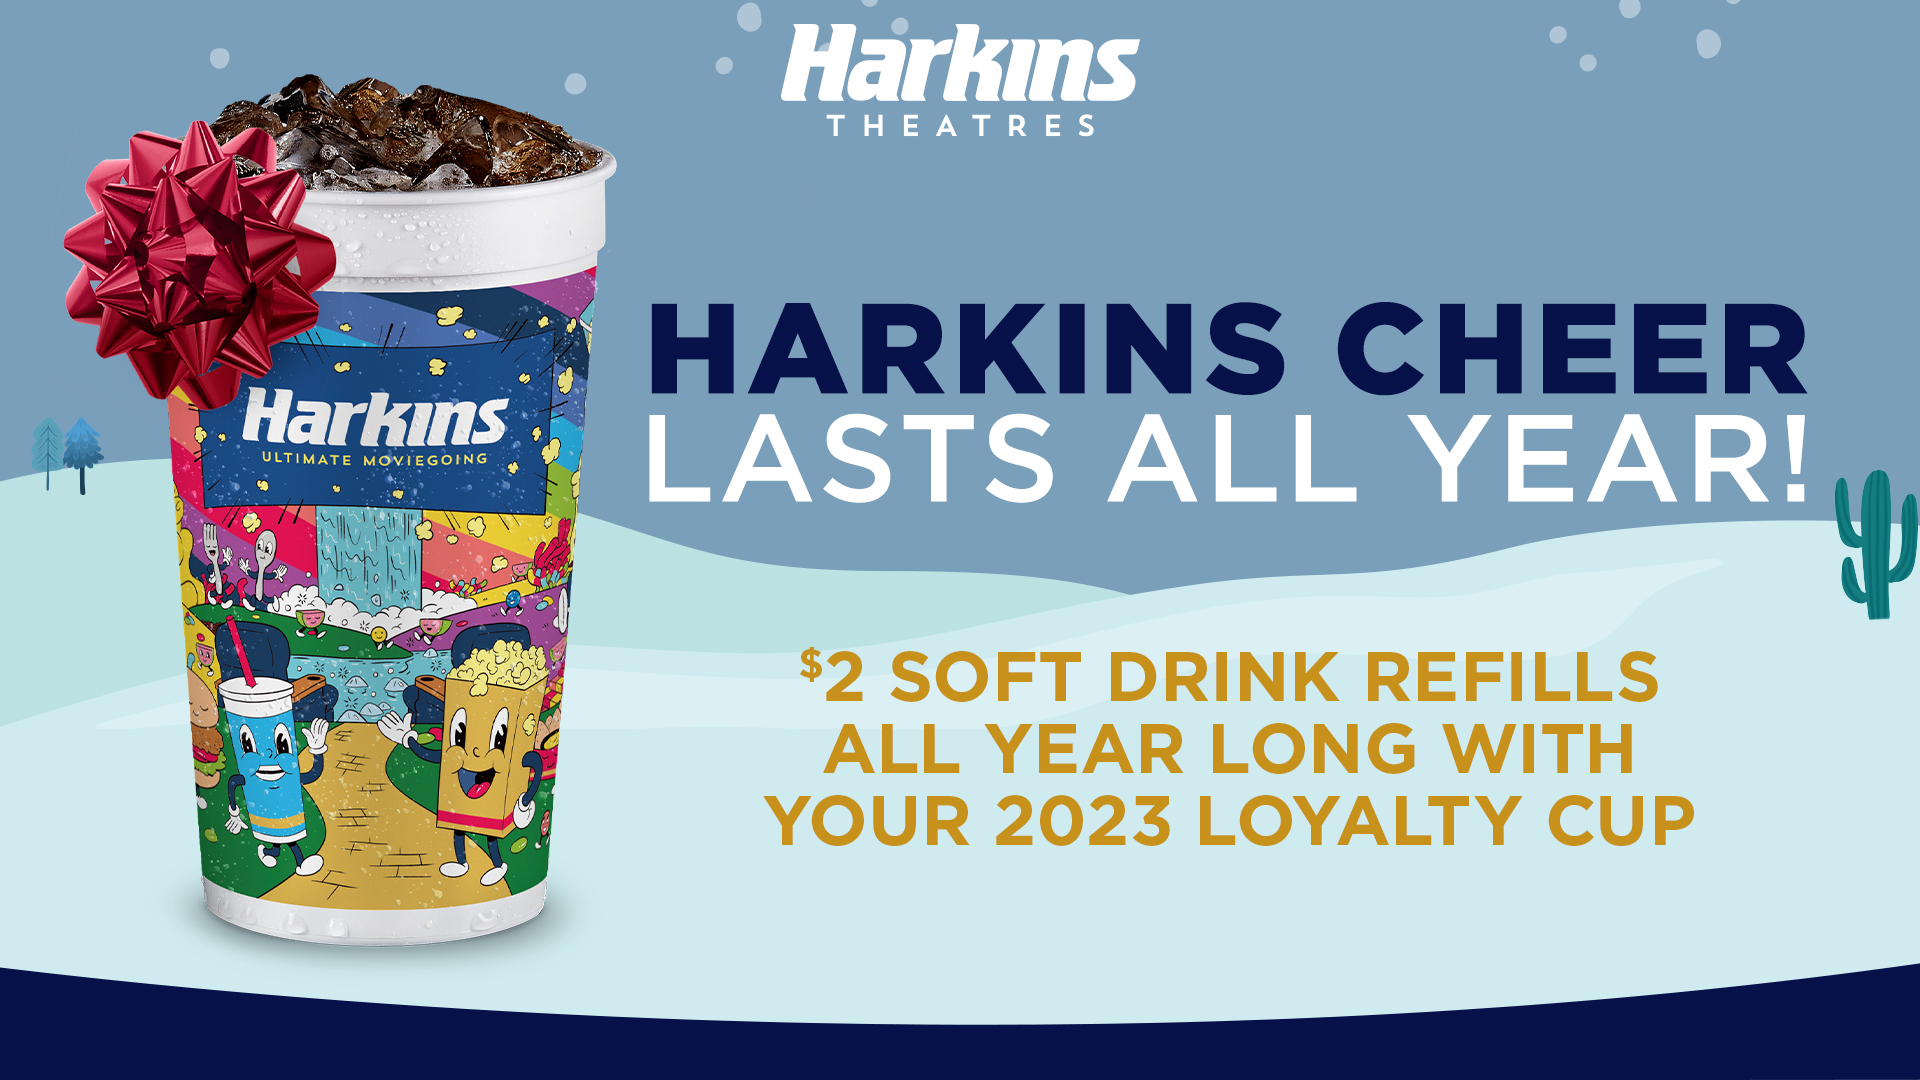 KARKINS THEATRES 
HARKINS CHEER LASTS ALL YEAR!
$2 SOFT DRINK REGILLS ALL YEAR LONG WITH  YOUR 2023 LOYALTY CUP

PICTURE IS OF THE NEW HARKINS CUP WITH A RED BOW